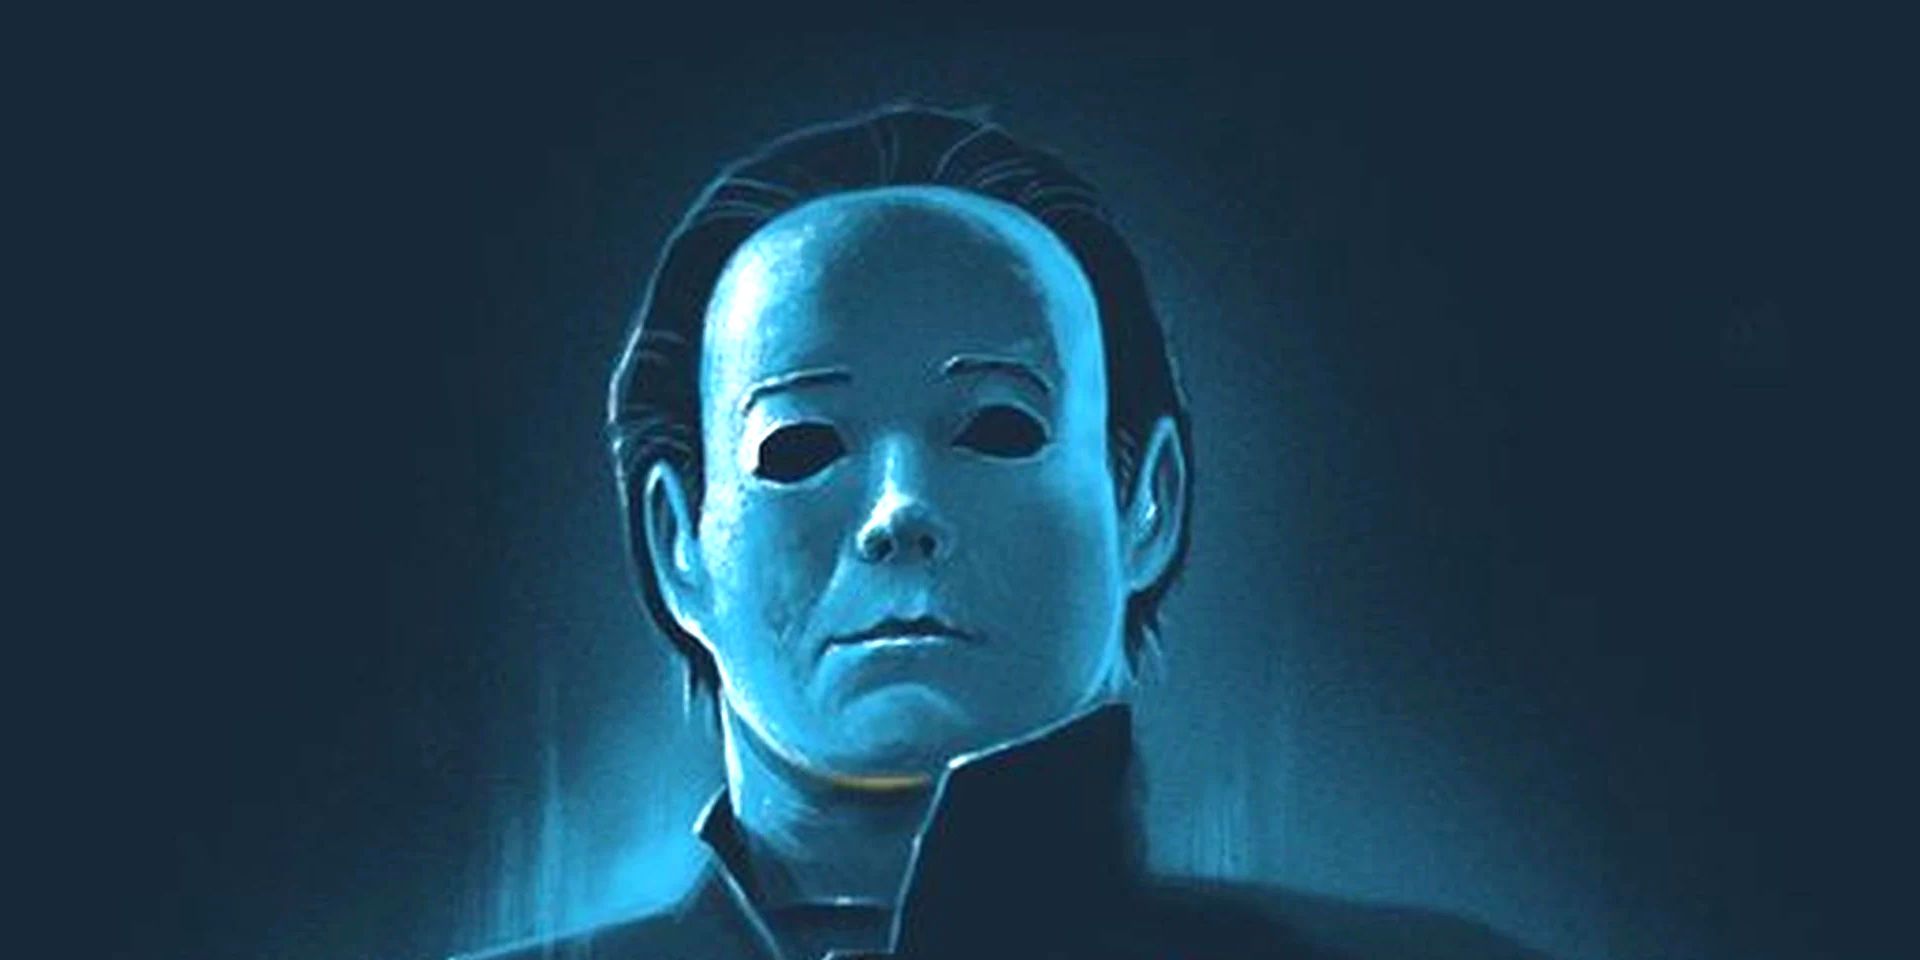 Halloween 4 Almost Turned Michael Myers Into a Ghost